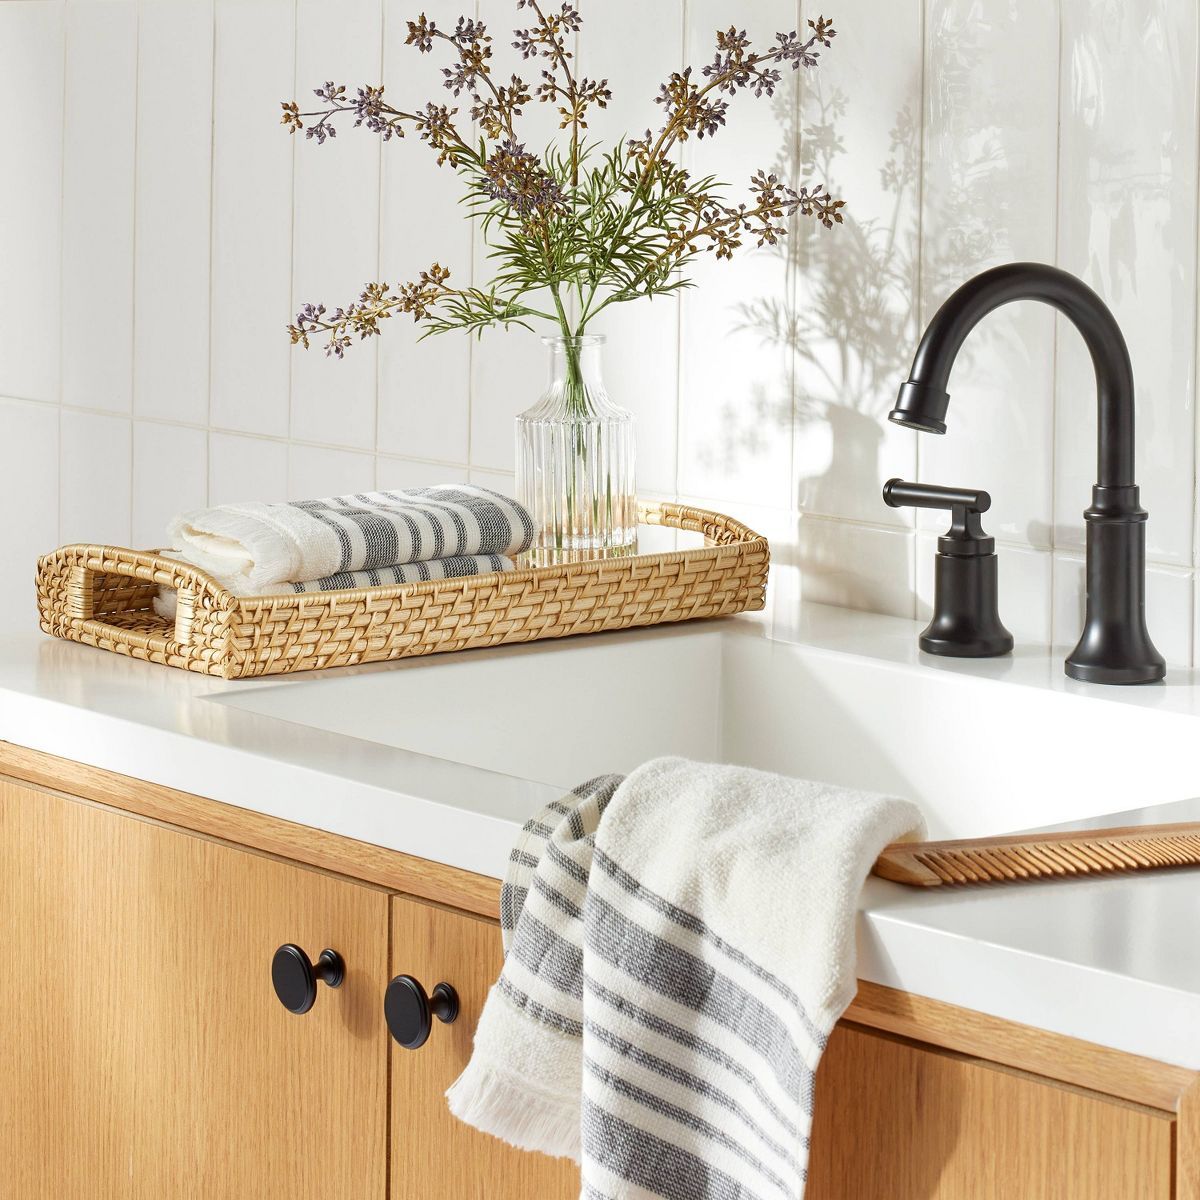 7"x14" Natural Woven Bathroom Tray - Hearth & Hand™ with Magnolia | Target